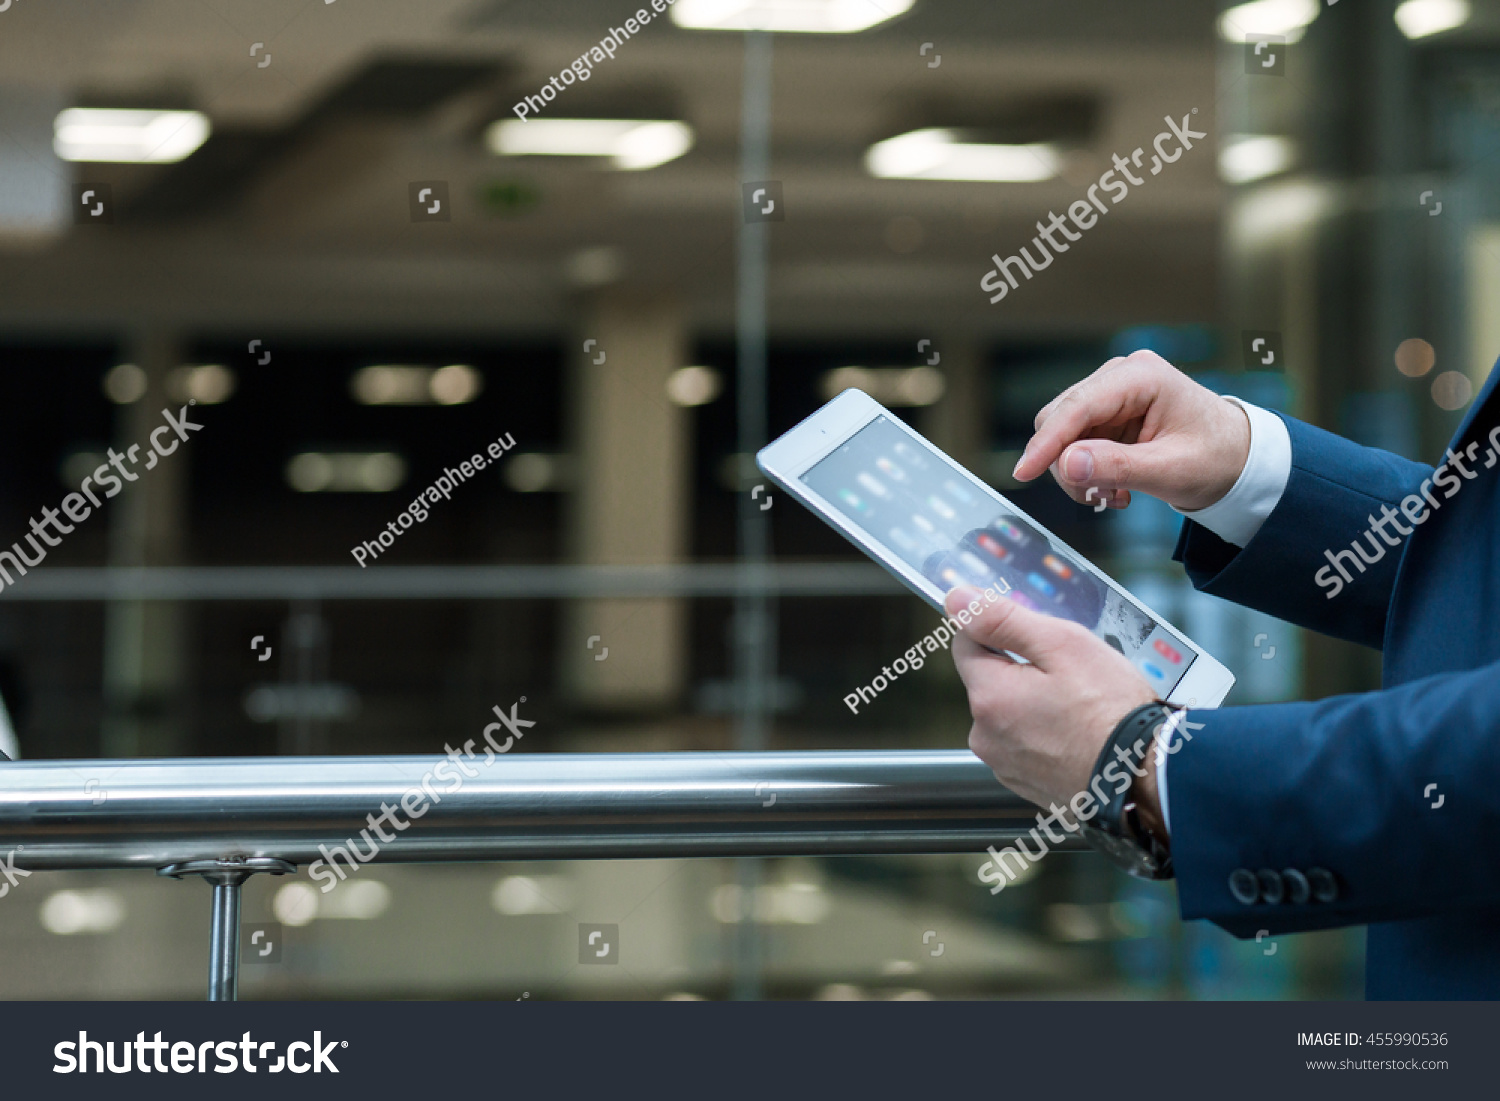 Close shot of an elegant man's hands holding a tablet, close to the railing #455990536